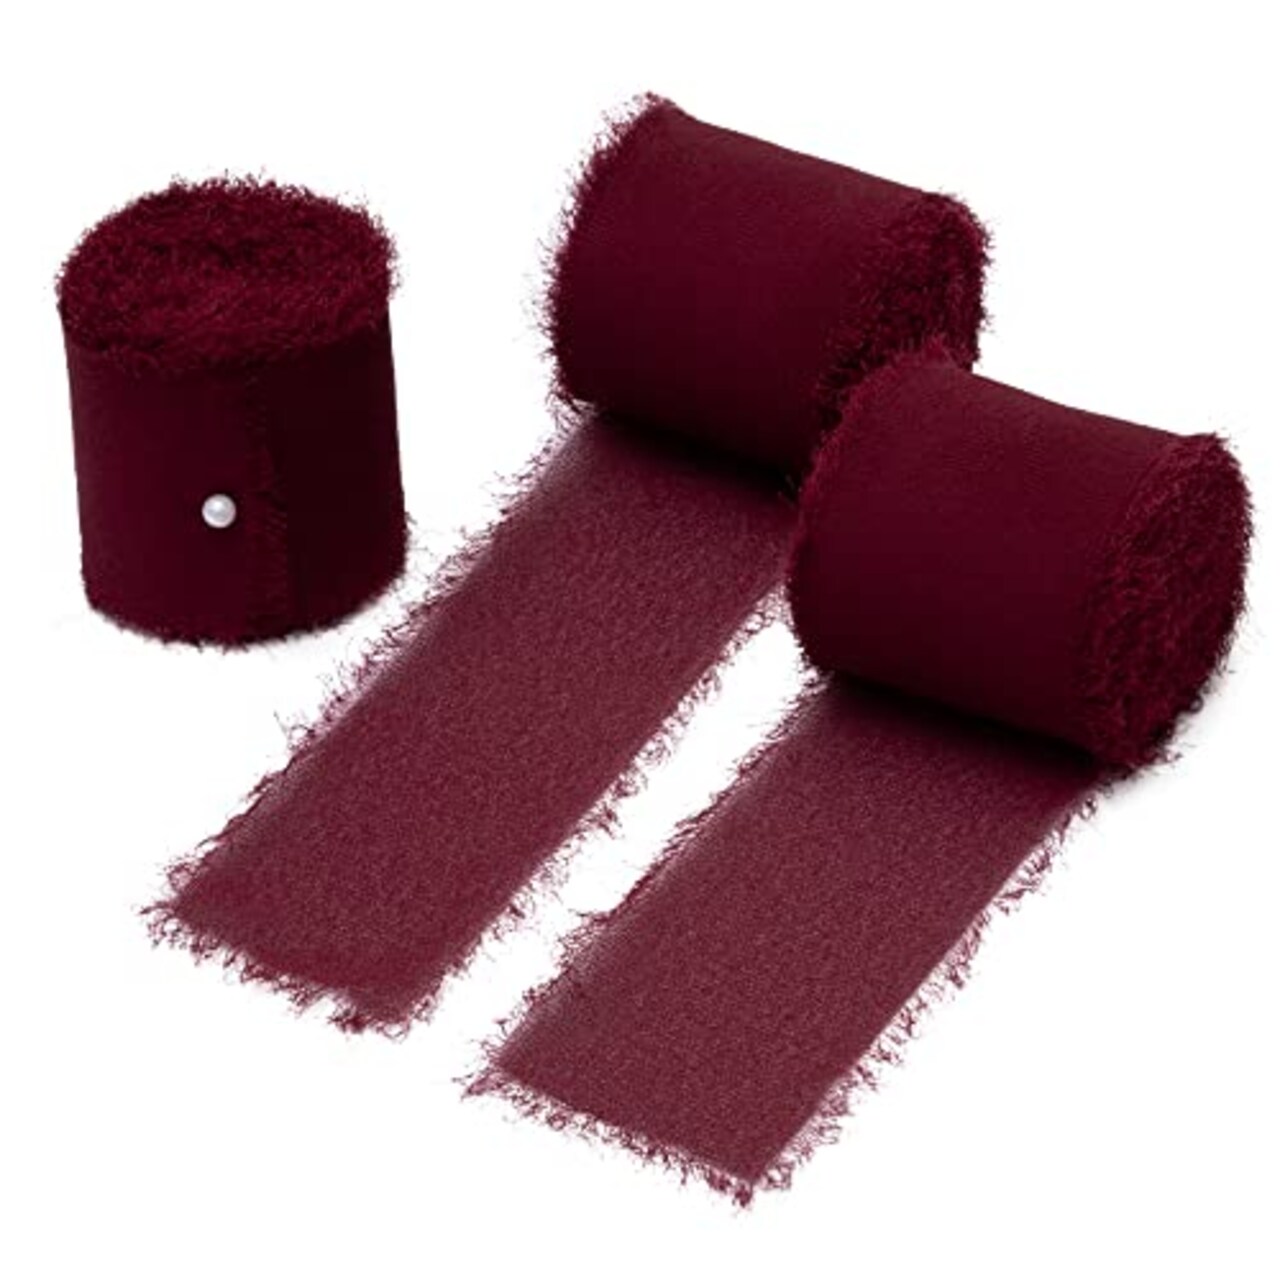 DORIS HOME 3 Rolls 2x7Yd Fringe Chiffon Ribbon for Flower Bouquet,  Handmade Burgundy Ribbon for Gift Wrapping, Frayed Edge Ribbon for Crafts,  Decorating, Bouquet Wrap, Wedding Invitation